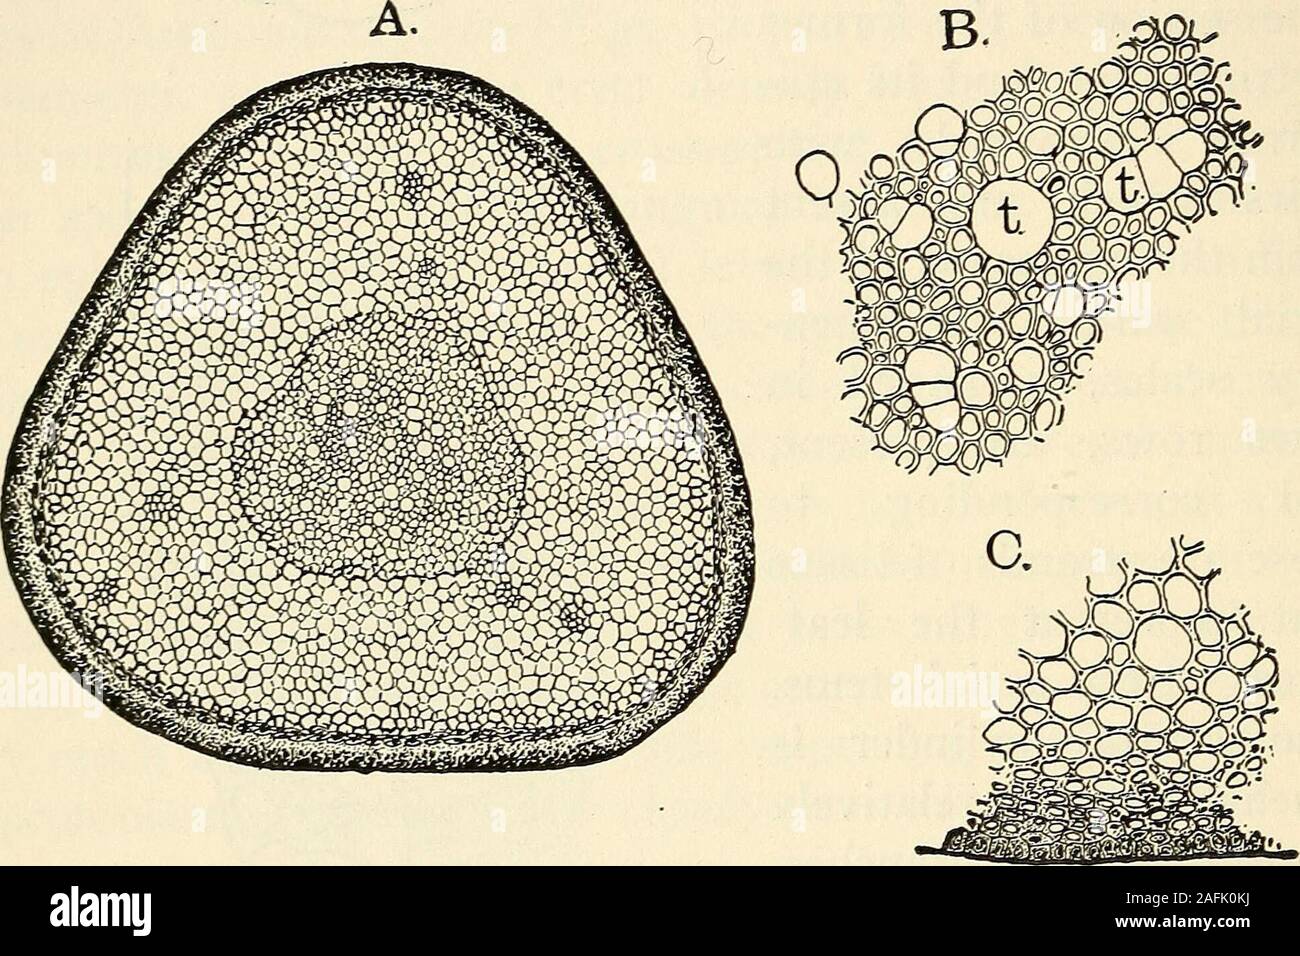 . The structure and development of mosses and ferns (Archegoniatae). Fig. 121.—A, Transverse section of the leaf ofLeucohryum; B, similar section of the leaf ofPolytrichum commune; cl, chlorophyll-bear-ing cells (after Goebel). 224 MOSSES AND FERNS CHAP. The male inflorescence of the Polytrichaceae is especiallyconspicuous, as the leaves immediately surrounding the anther-idia are different both in form and colour from those of thestem. They are broad and membranaceous, and more or lessdistinctly reddish in colour. A well-known peculiarity ofthese forms is the fact that the growth of the stem Stock Photo